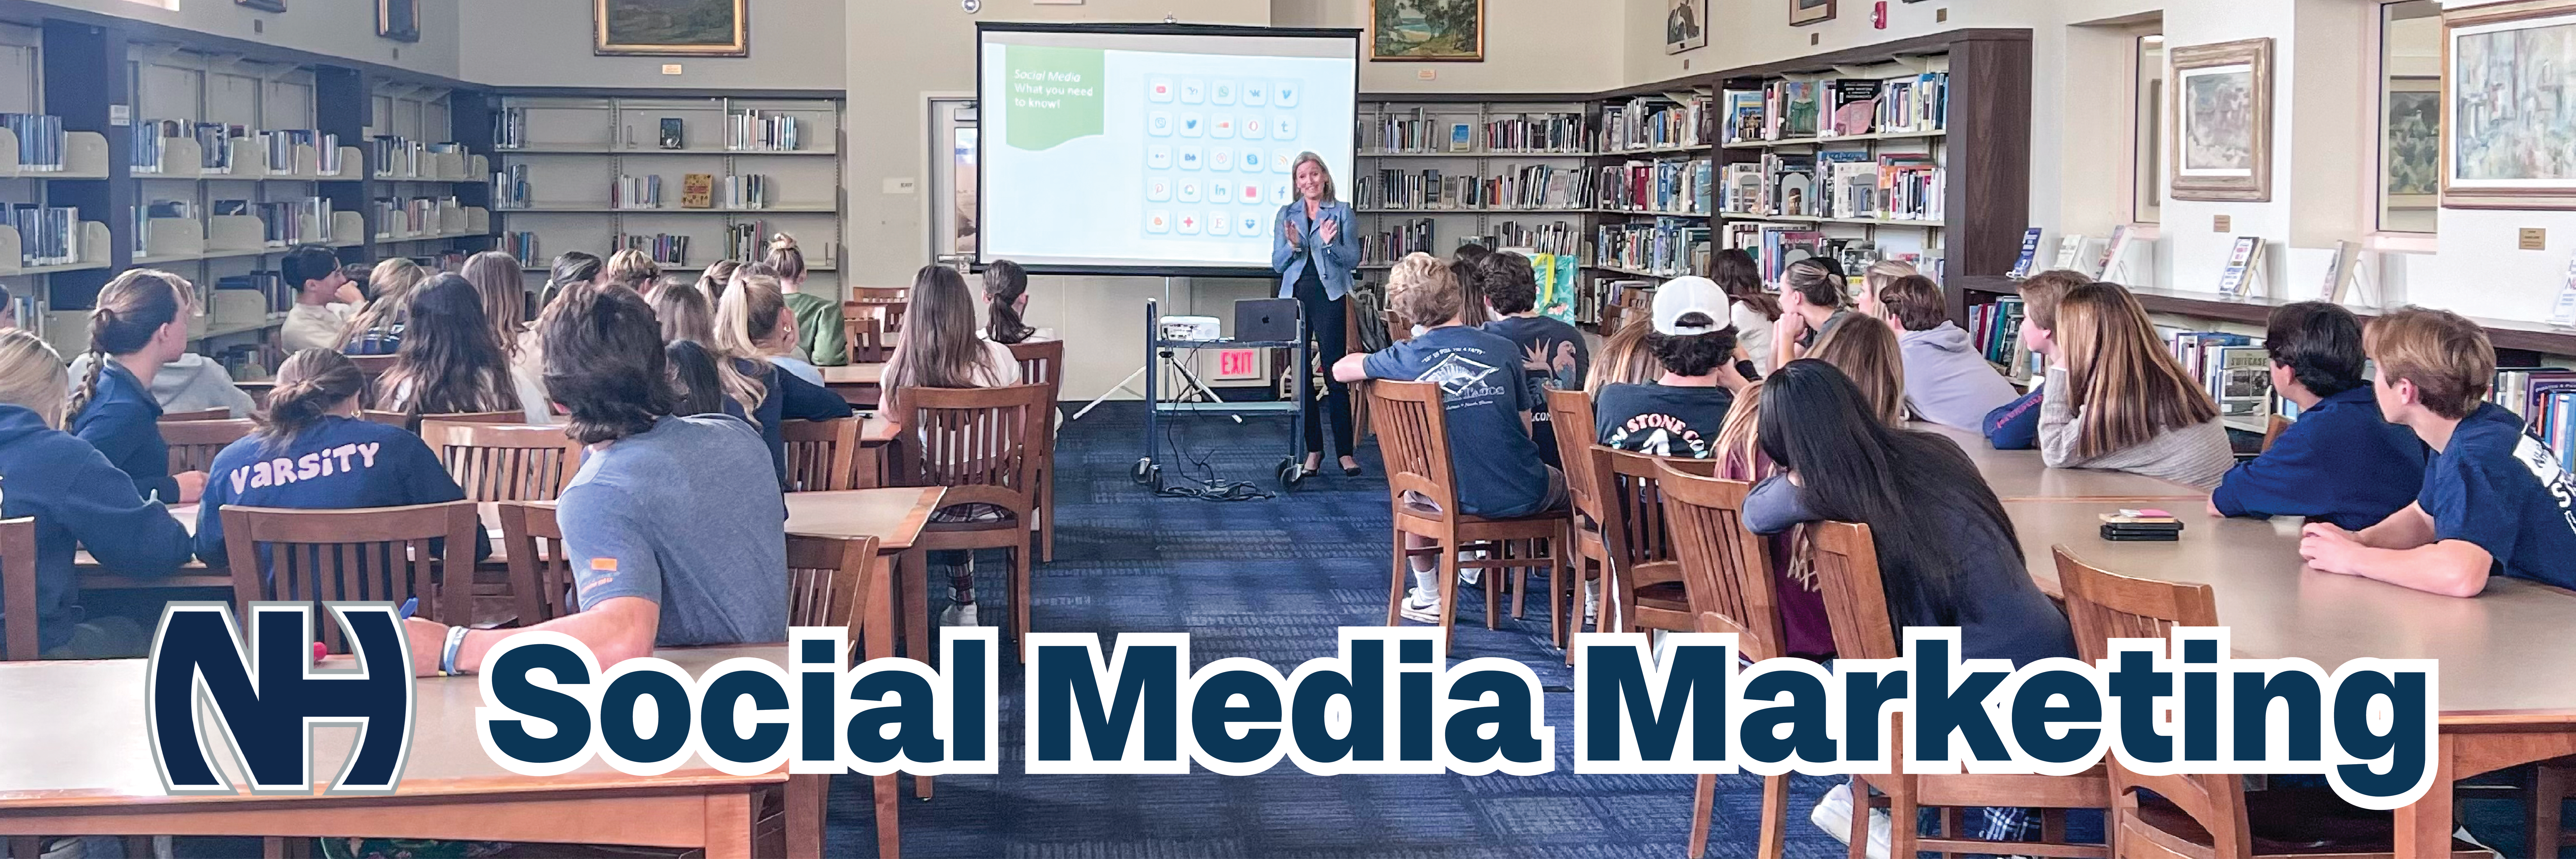 Passco Companies Shares Social Media Marketing Expertise with Newport Harbor High School Students